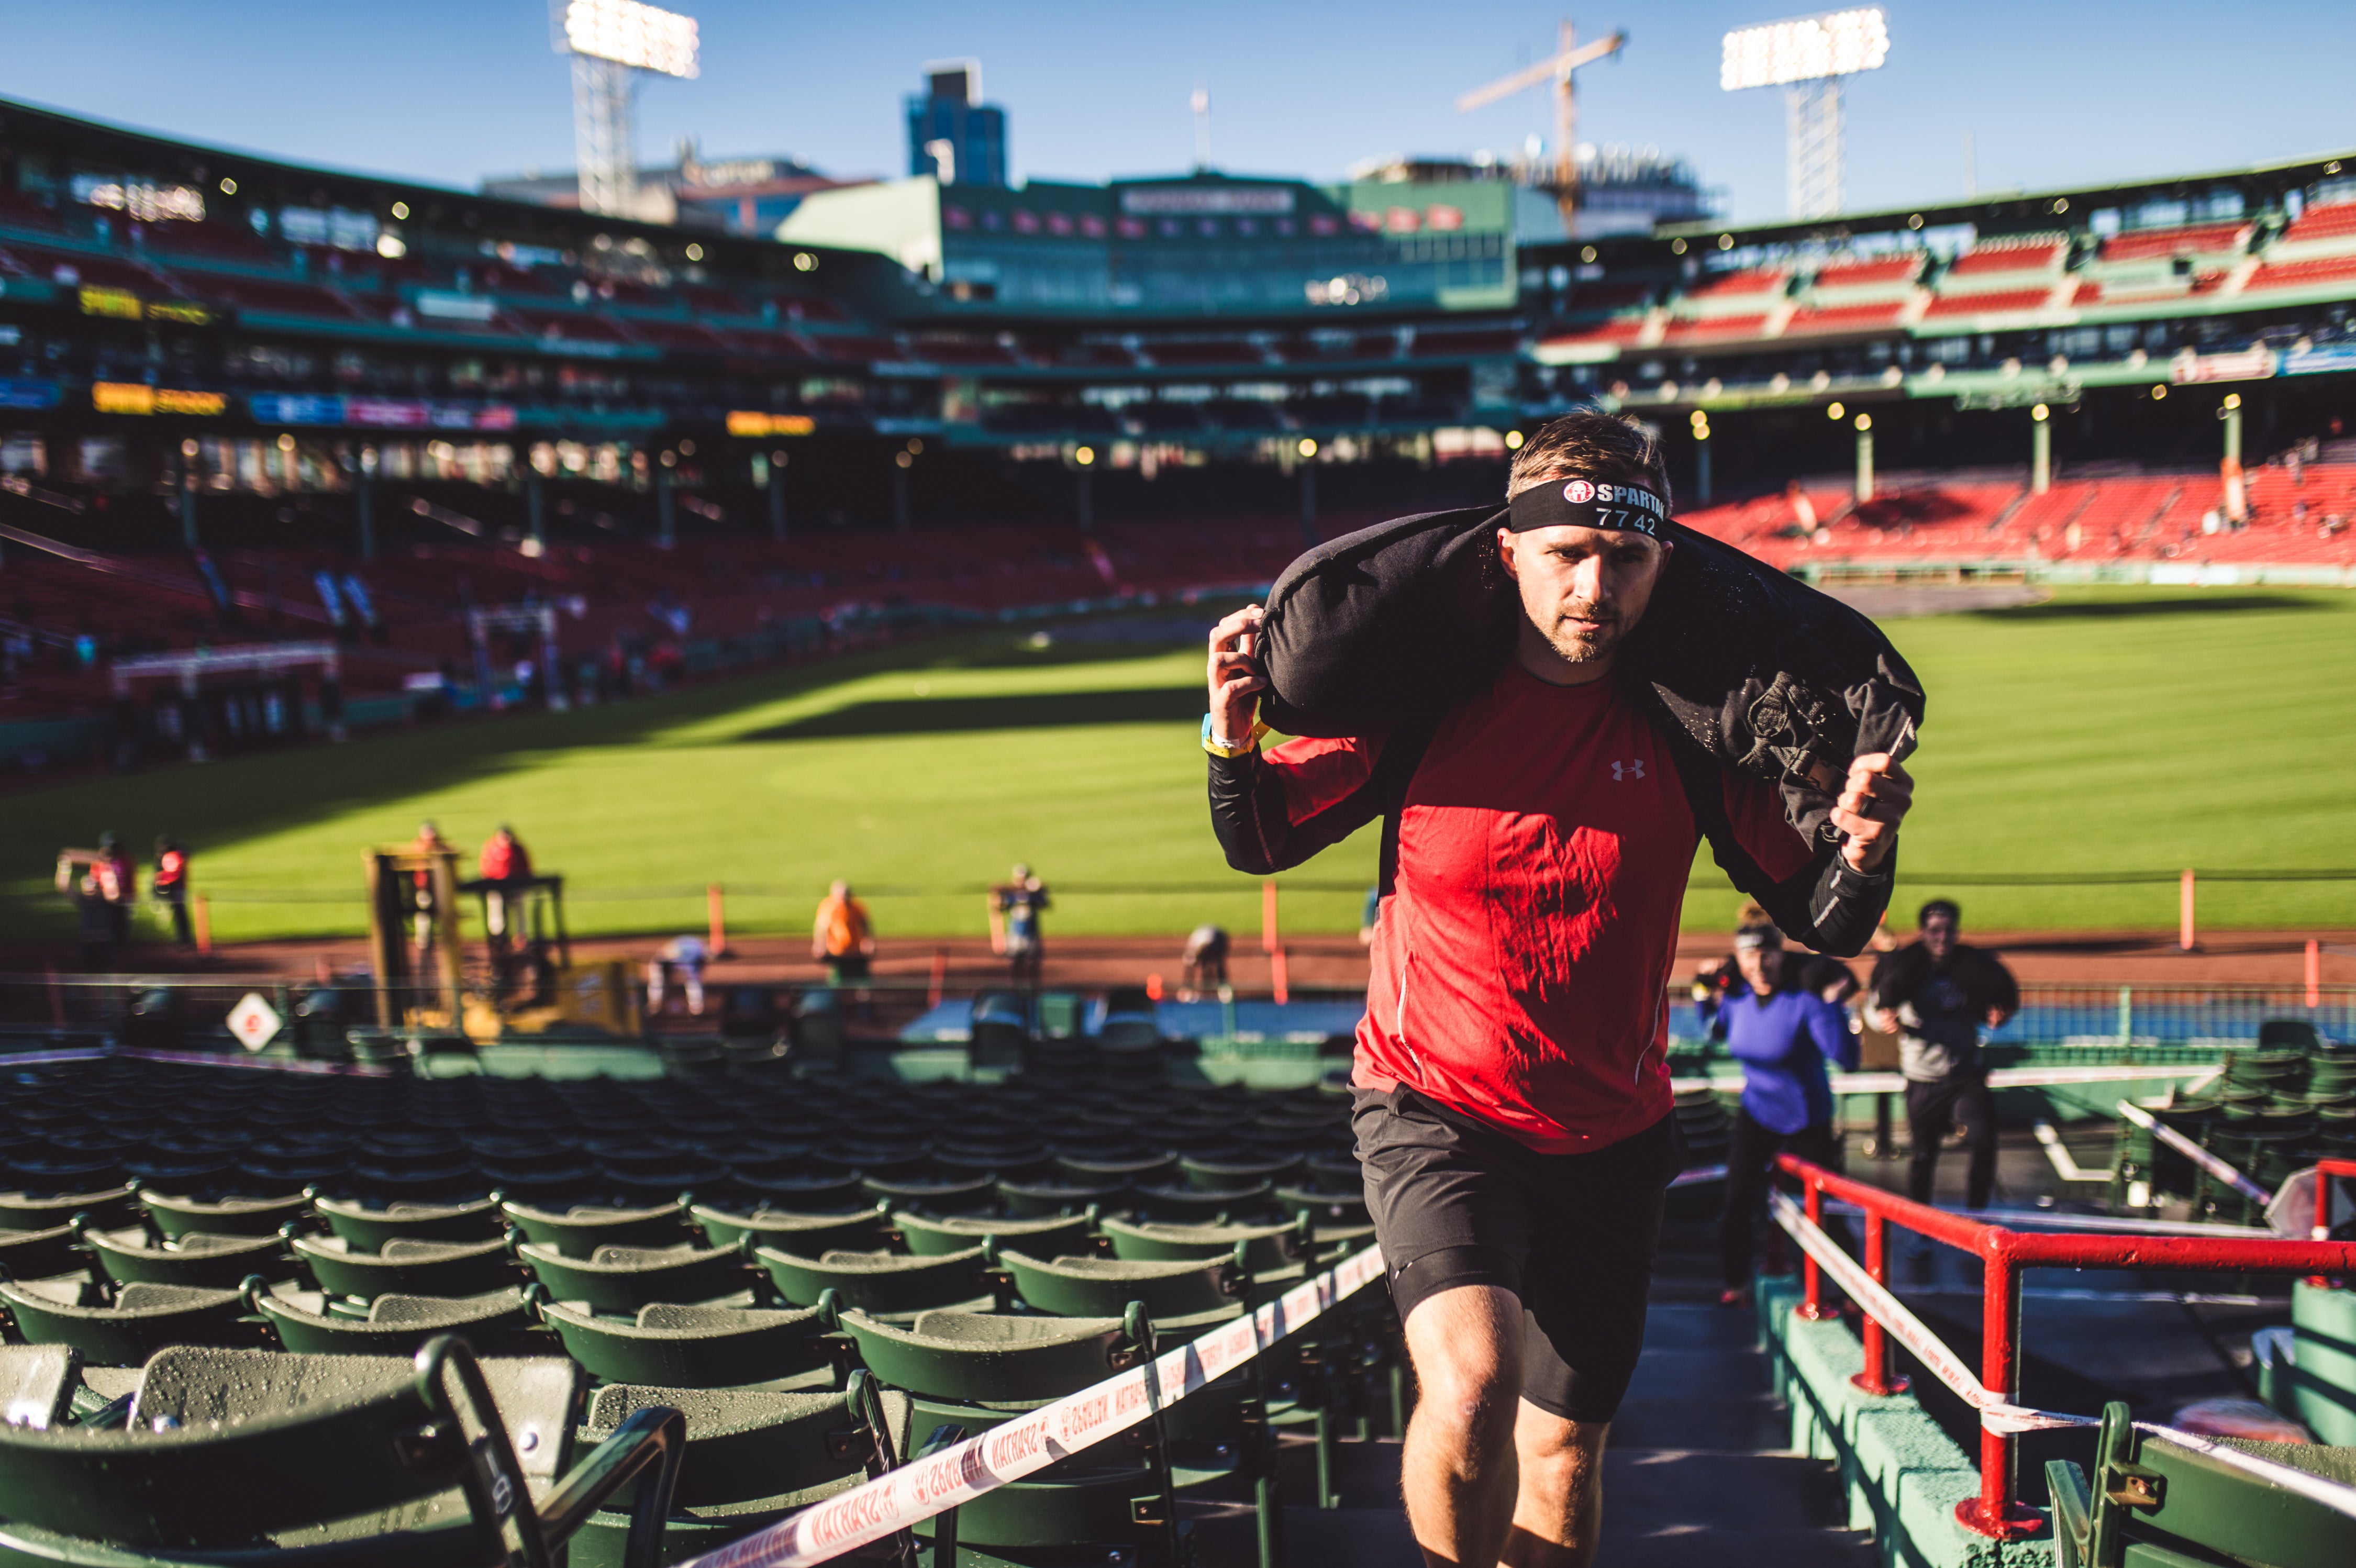 a racer completing a spartan race in november 2022 at fenway park